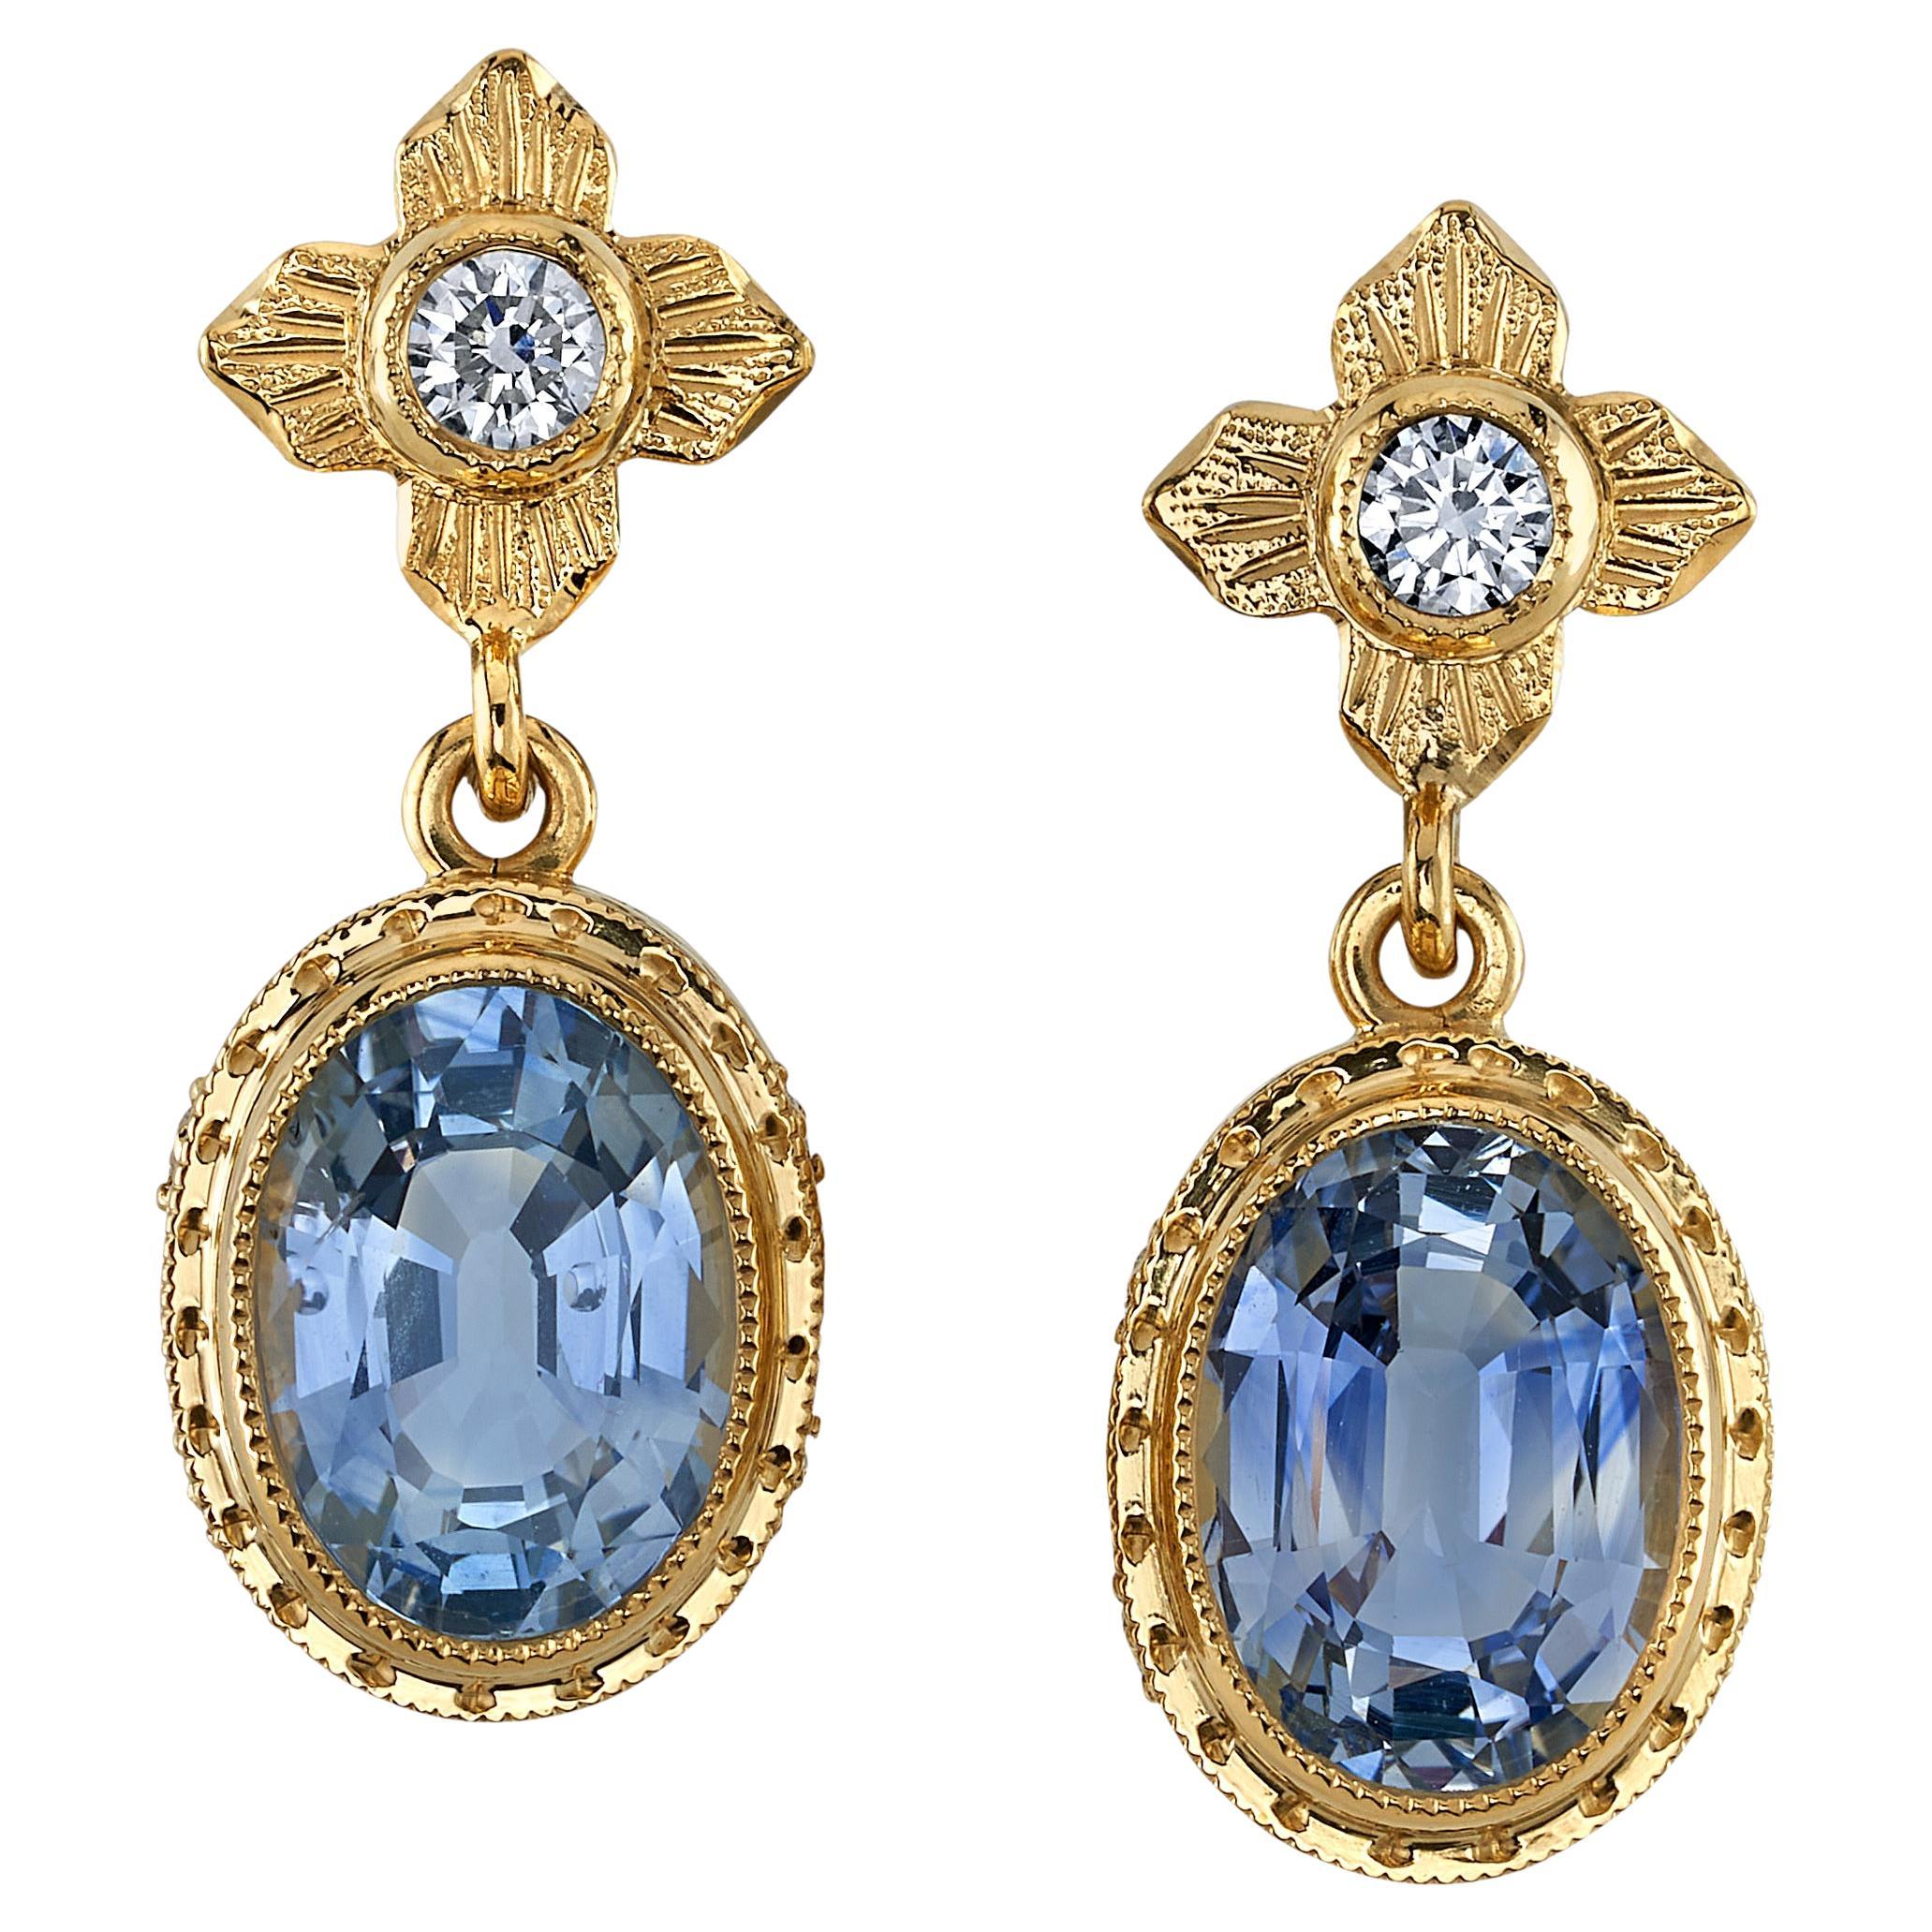 Cornflower Blue Sapphire and Diamond Drop Earrings in Yellow Gold , 4.58 Carats 